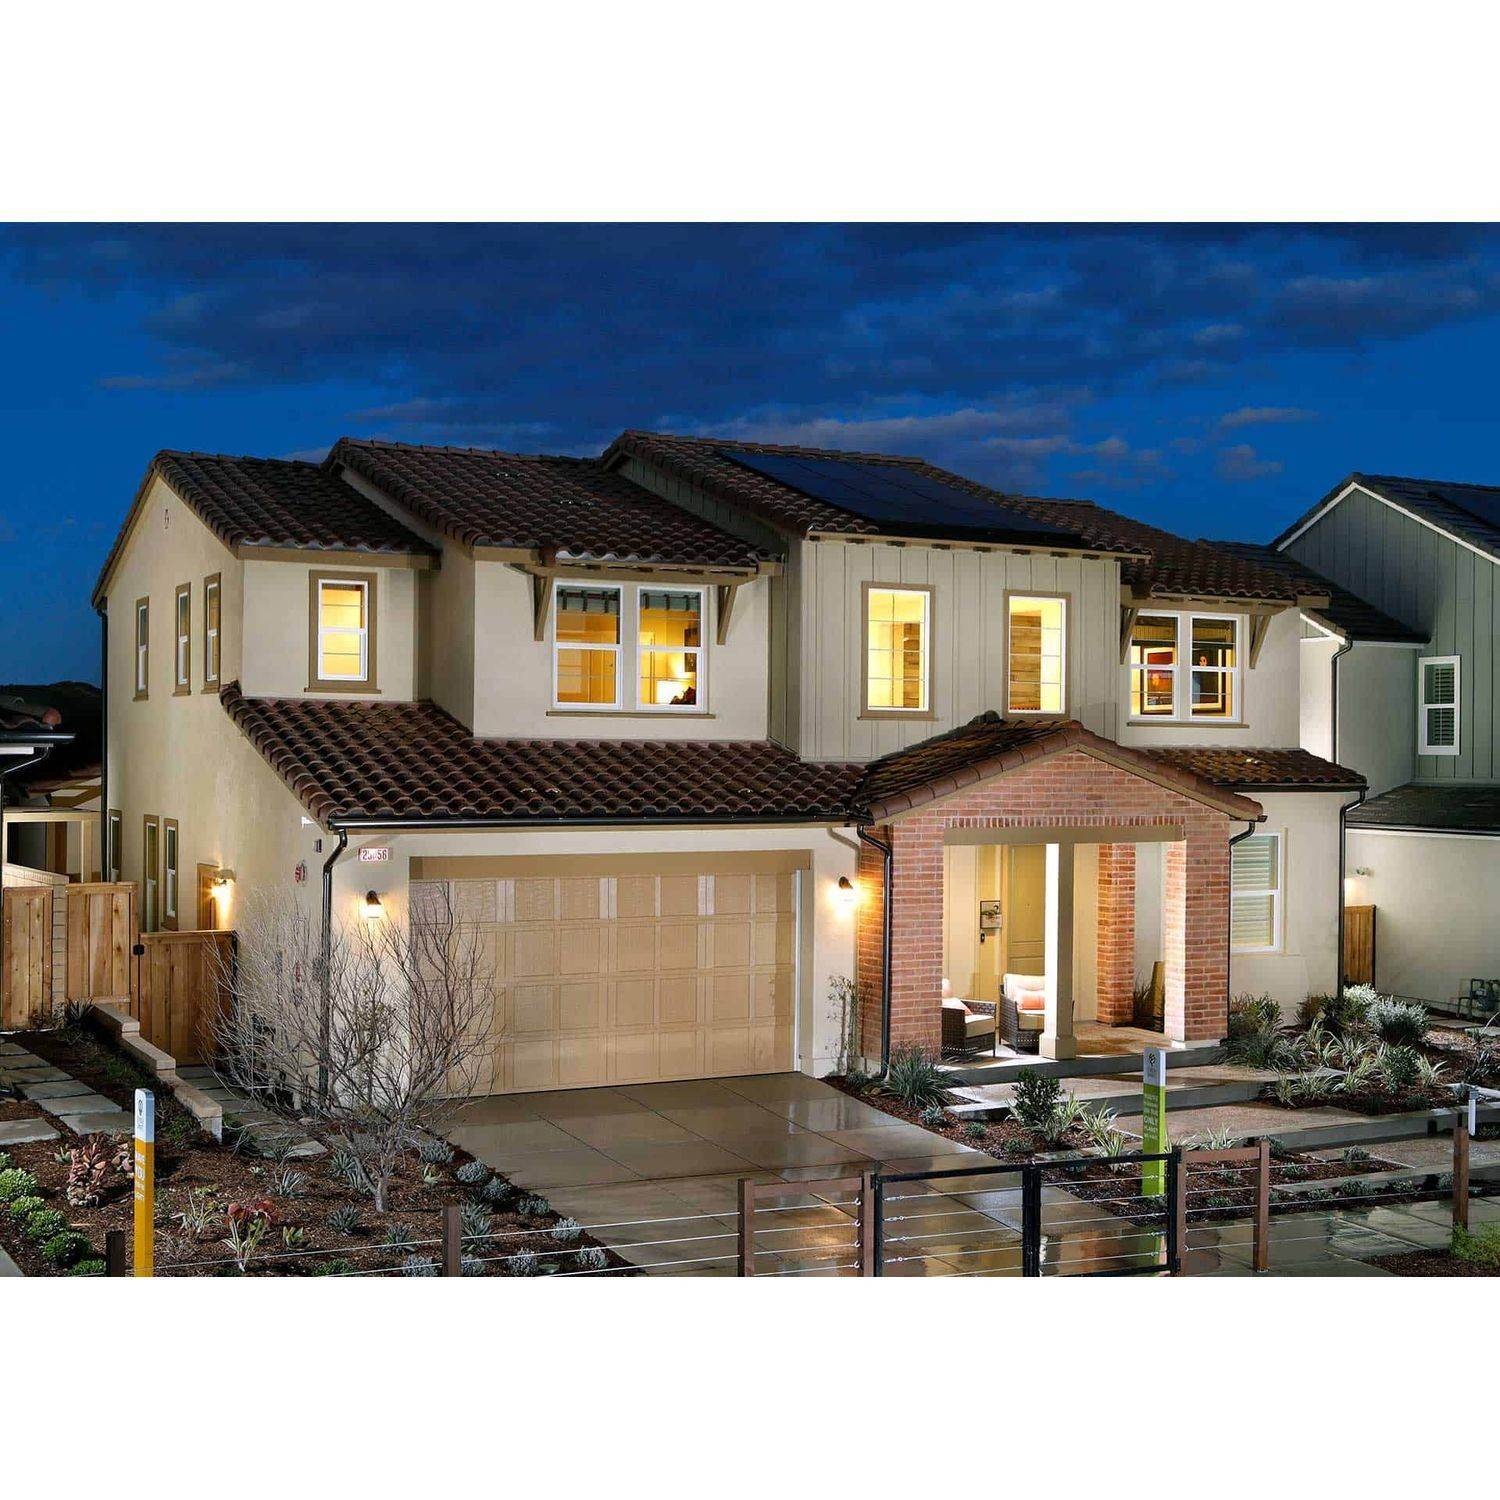 Single Family for Active at The Cove At River Islands - Plan 2 2799 Orion Court LATHROP, CALIFORNIA 95330 UNITED STATES